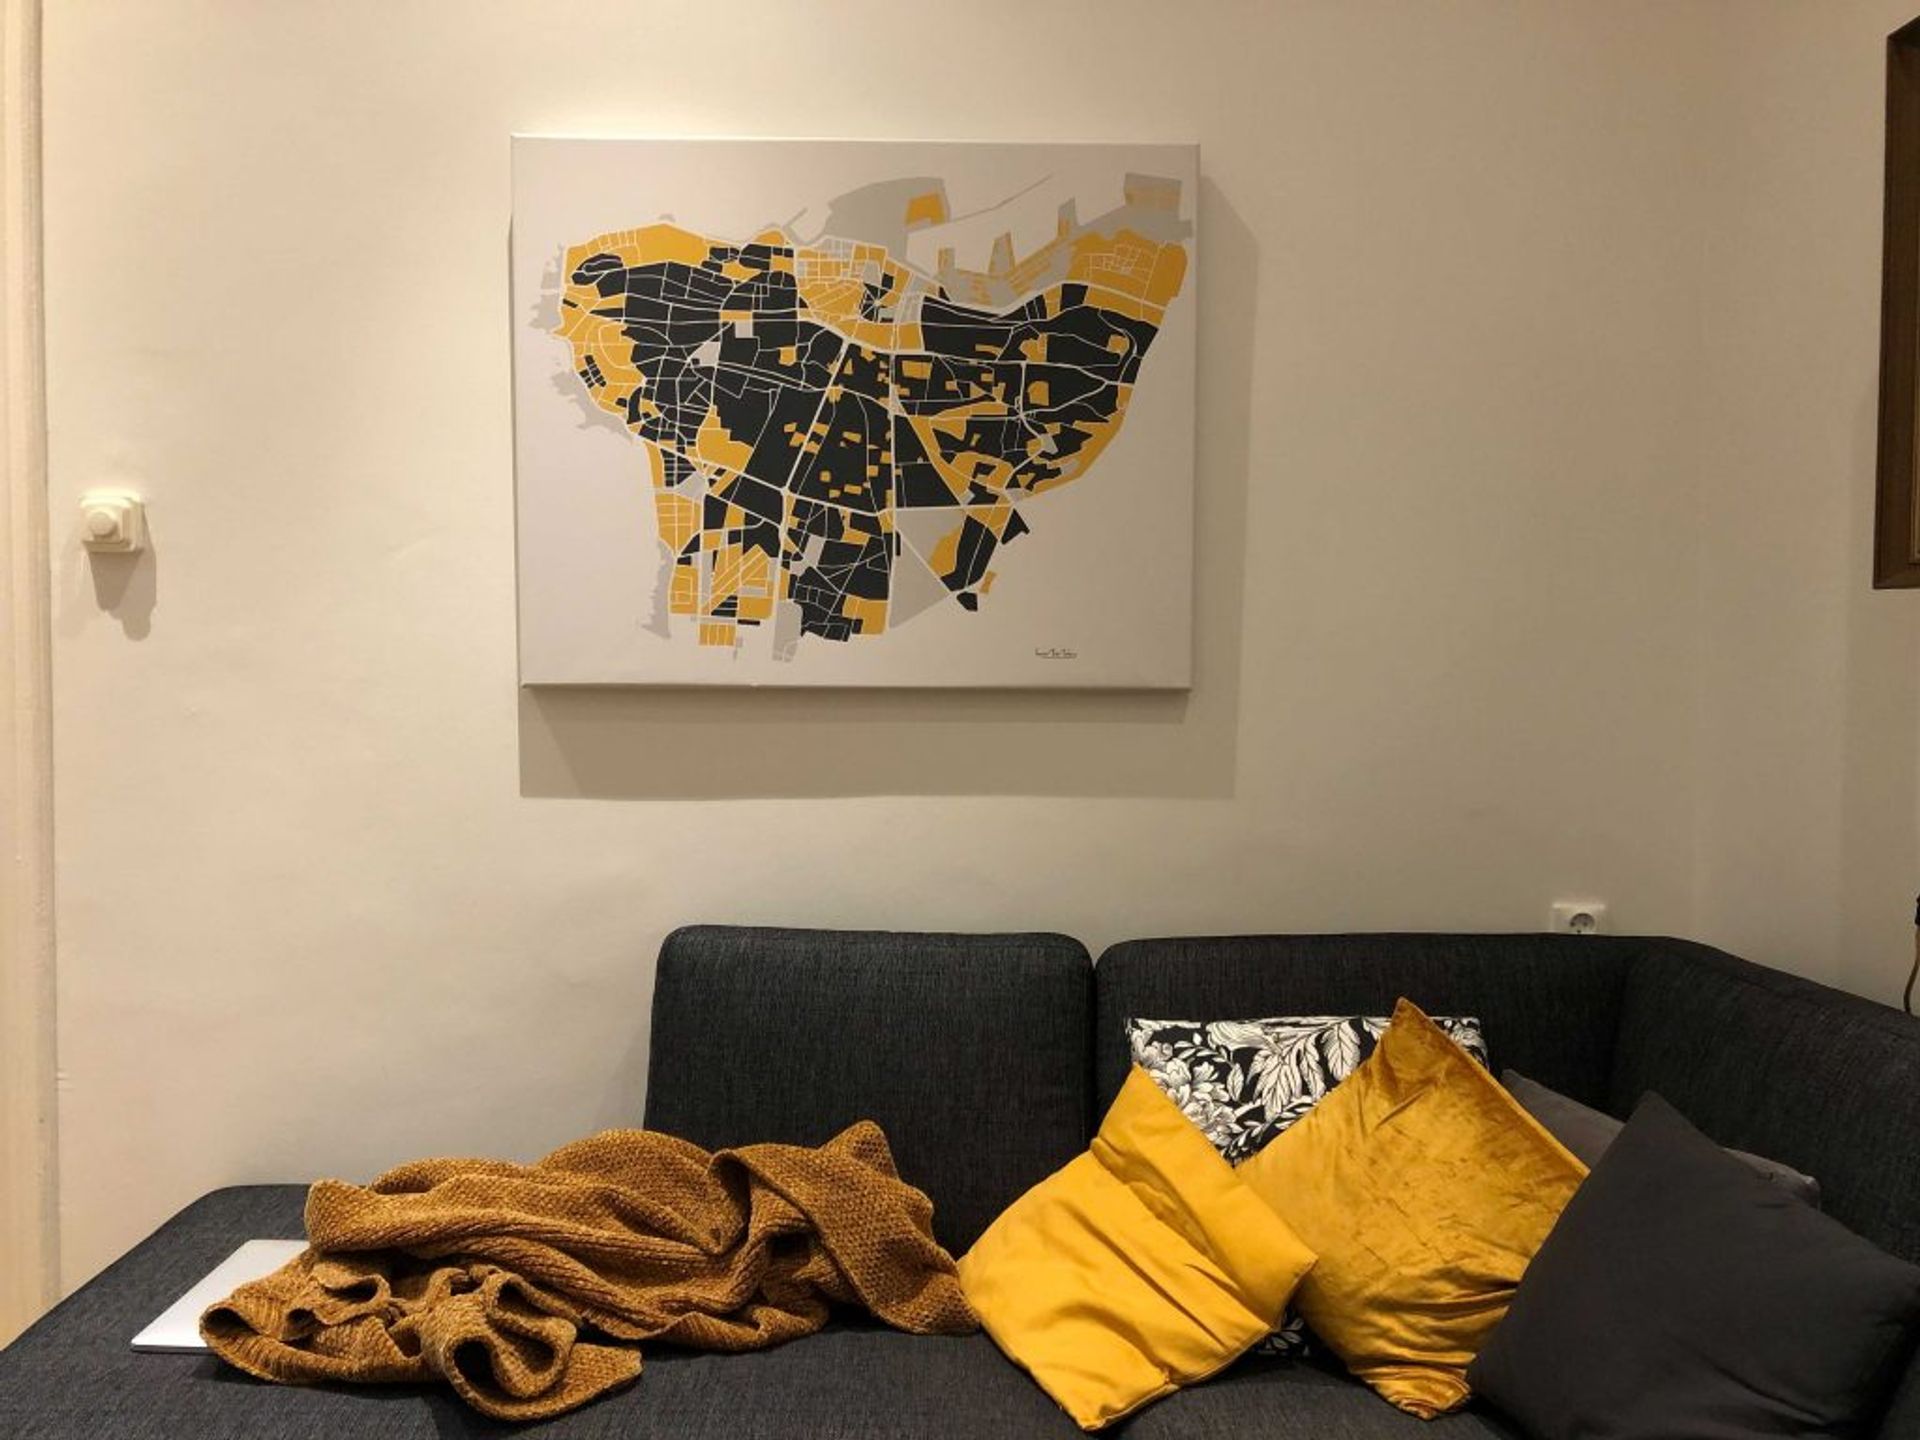 Picture showing a sofa and a canvas on the wall. The canva contains an illustration of Beirut.